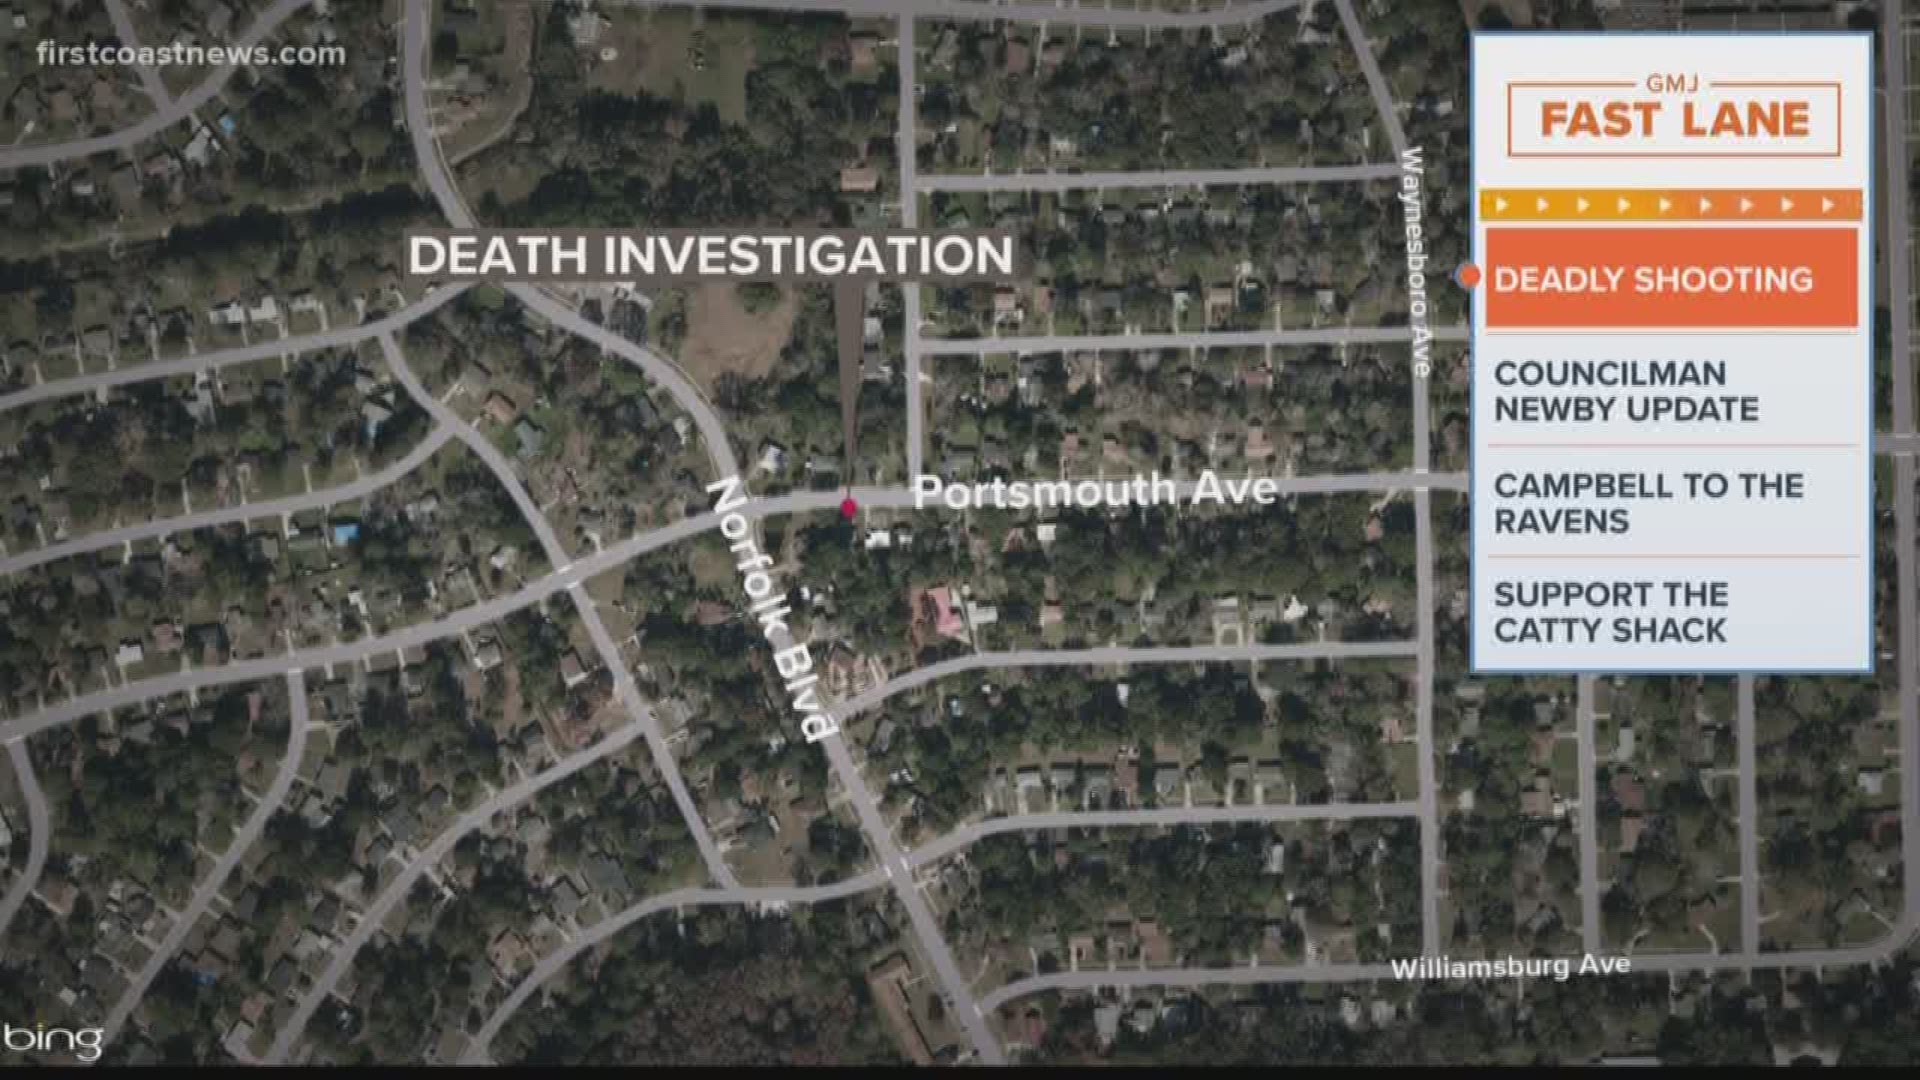 The Jacksonville Sheriff's Office said a woman was shot and killed on the 4700 block of Portsmouth Avenue.